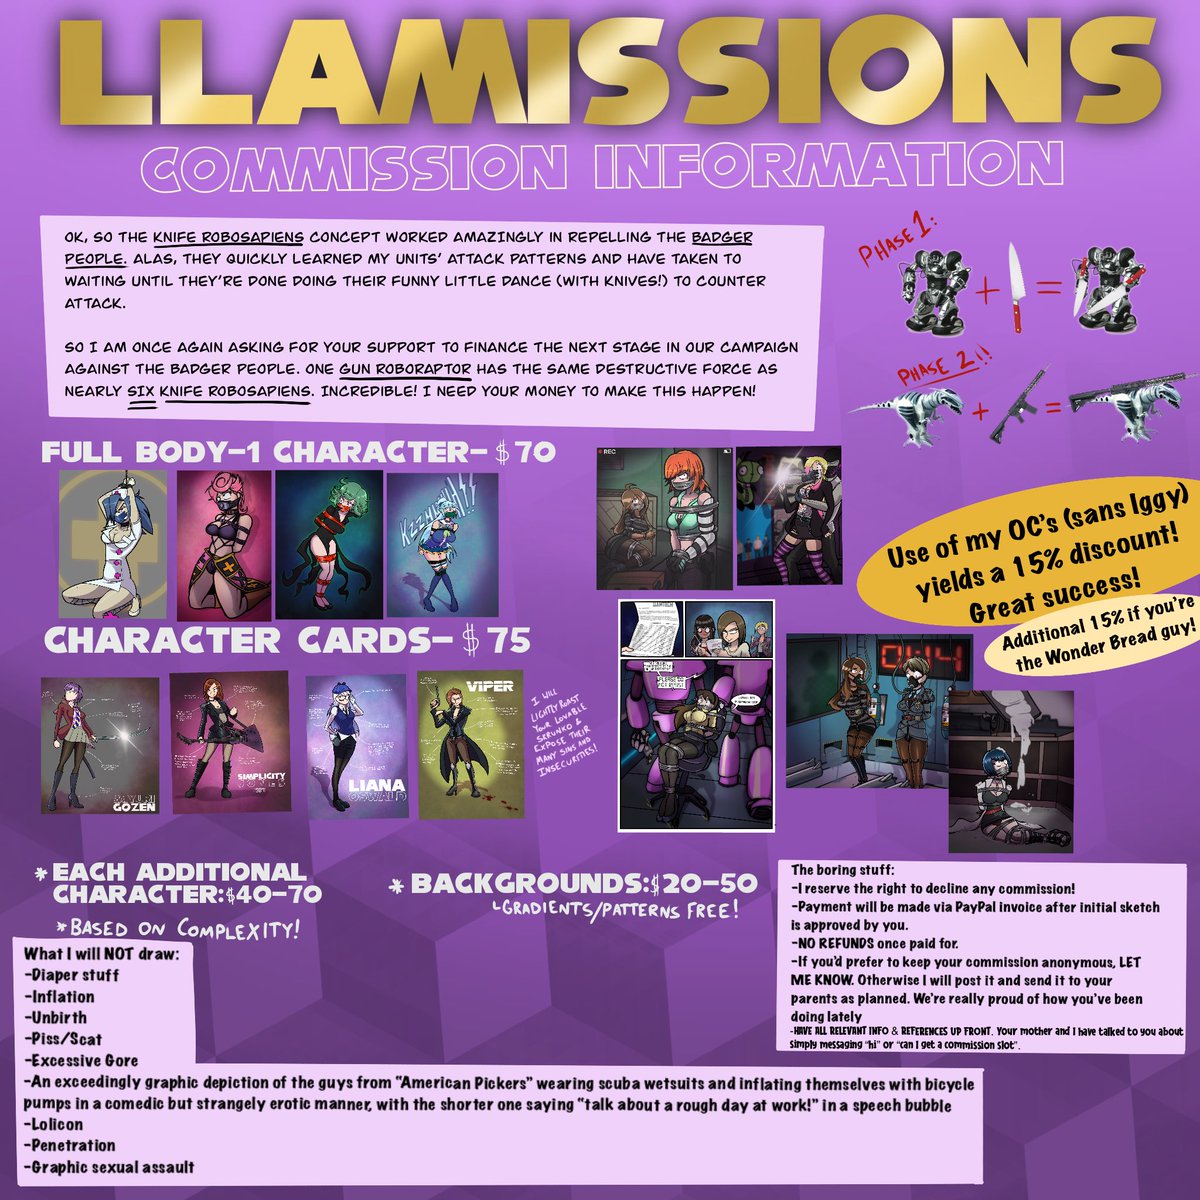 Llamissions! They’re open again! It’s the month of May so let’s do a 15% discount on MAY/MEI! (But not the Overwatch one absolutely not)